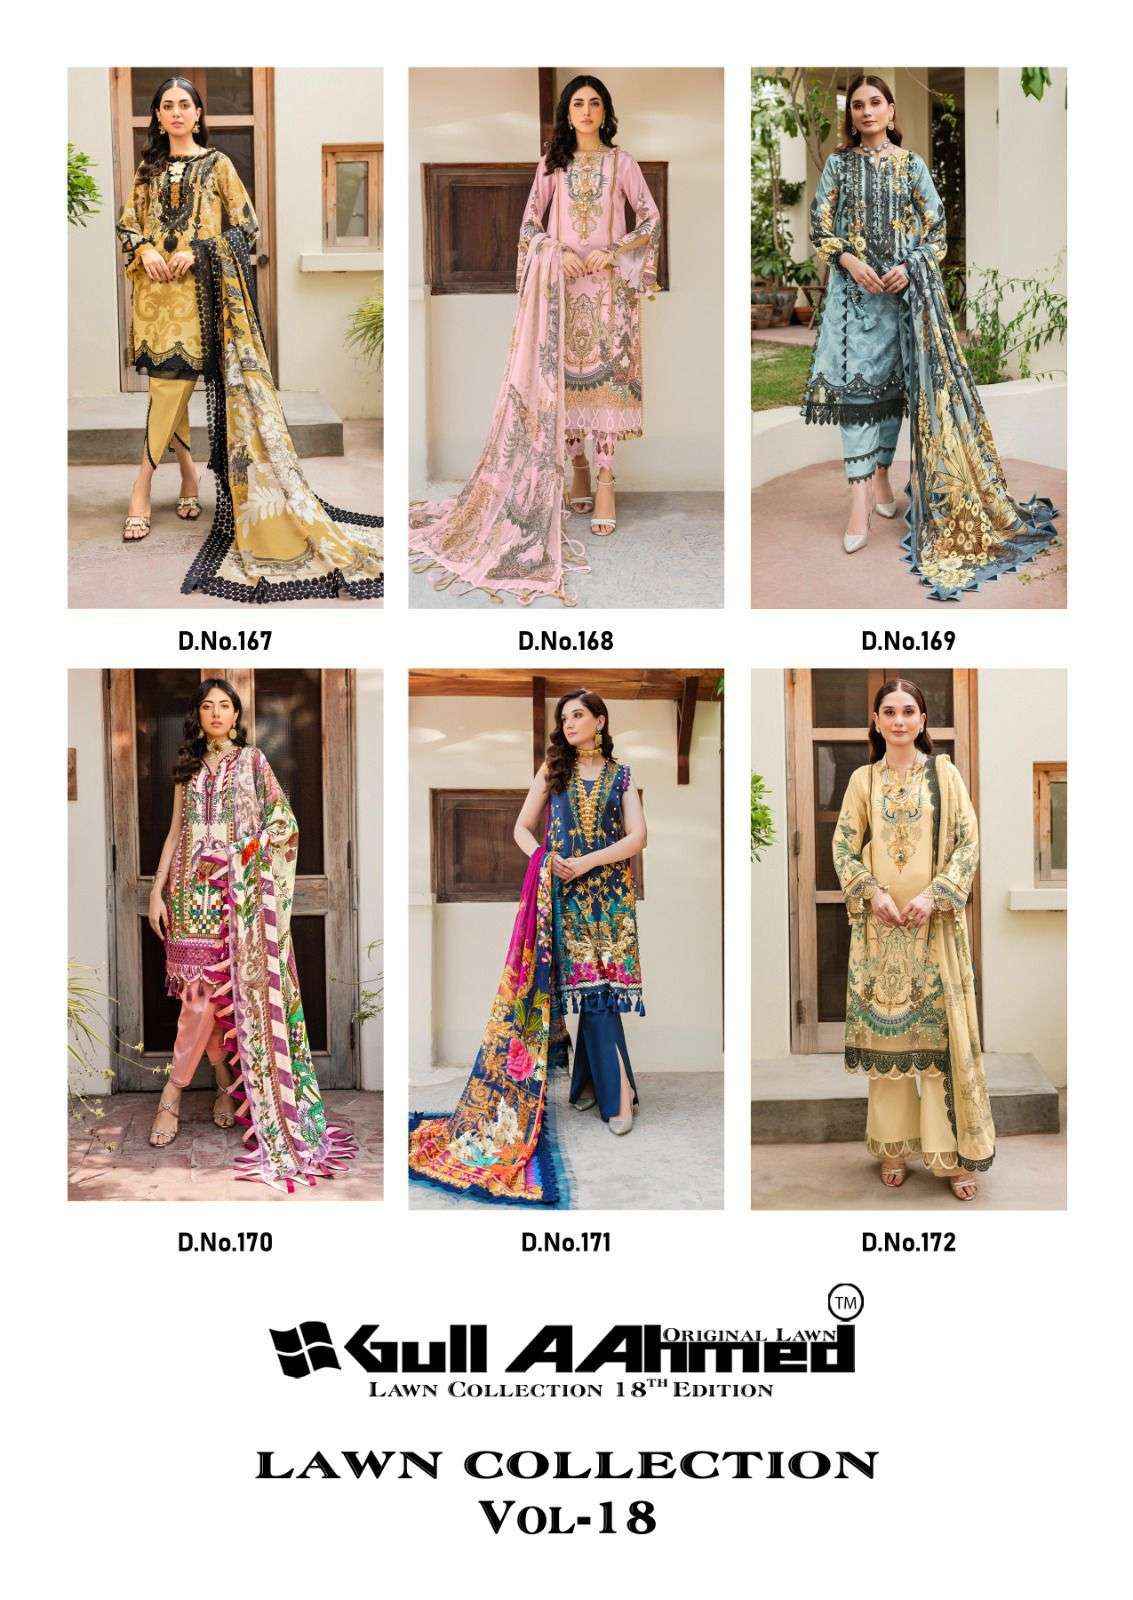 GULL AAHMED LAWN COLLECTION VOL 18 PAKISTANI DRESS MATERIAL ( 6 PCS CATALOG )